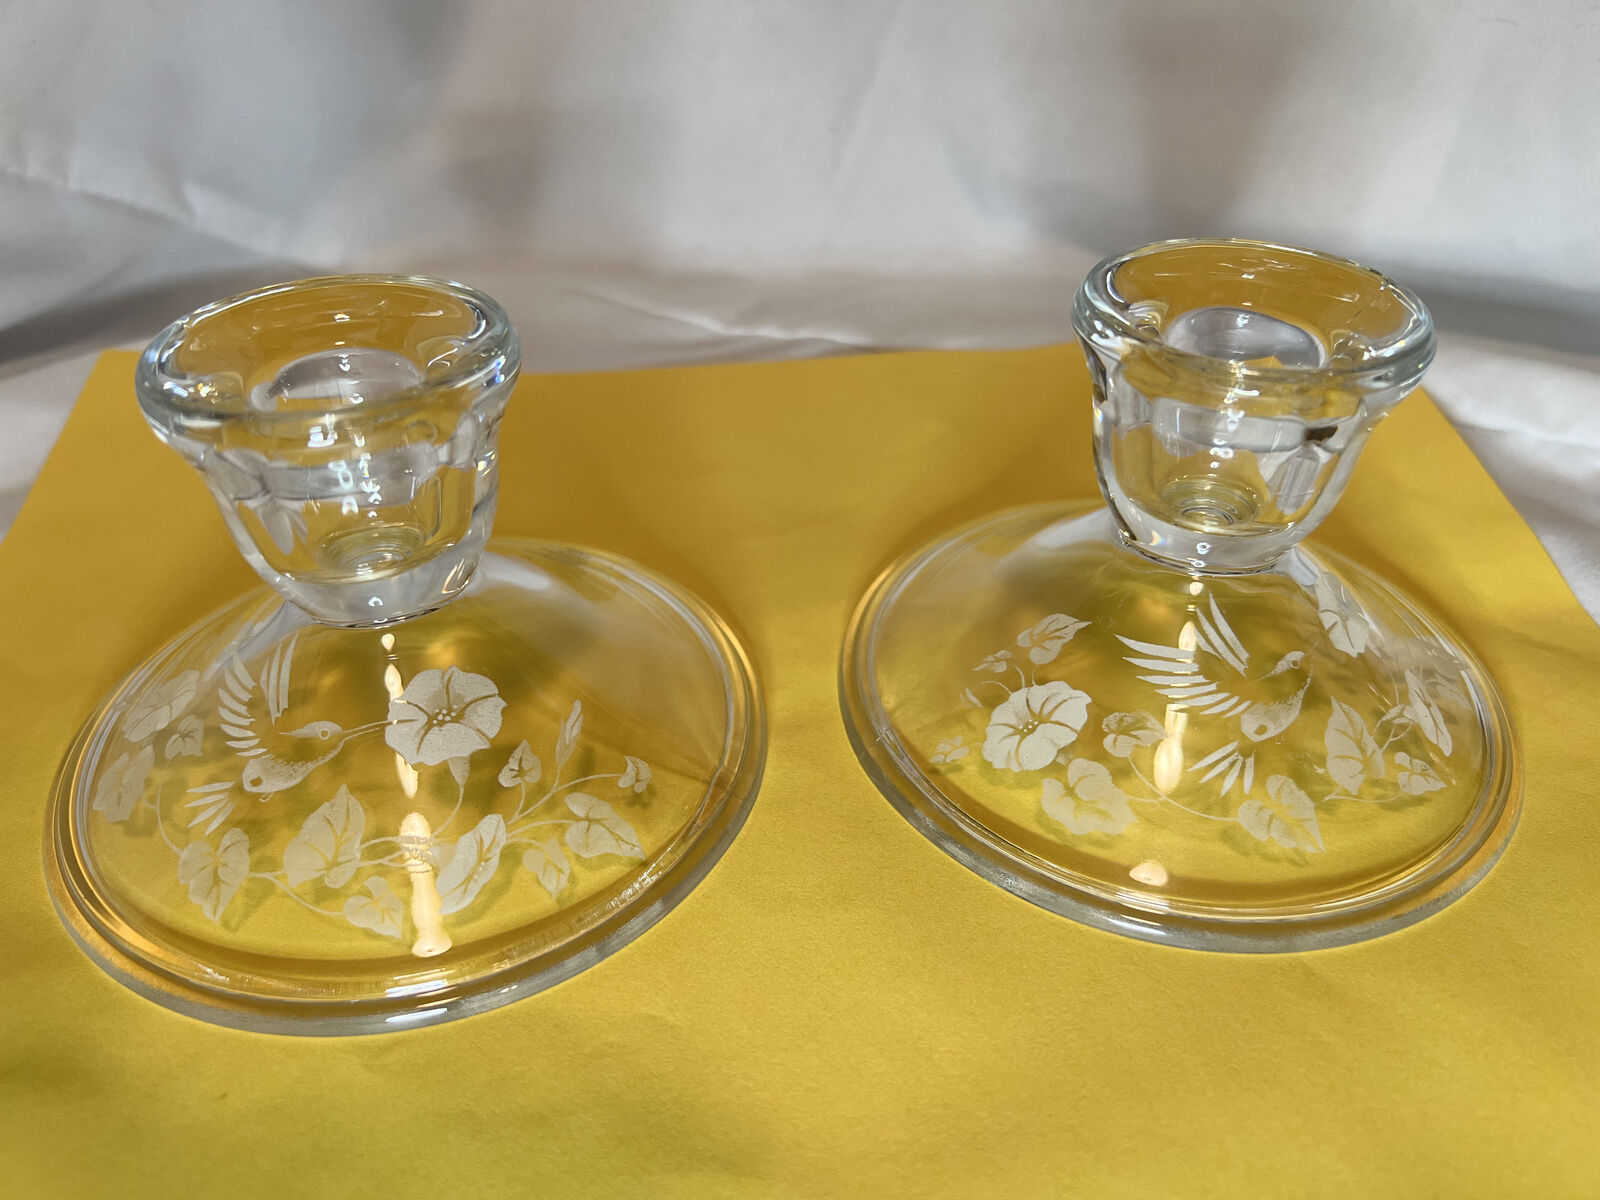 Vintage 1980'S Avon 24% Lead Crystal Etched Hummingbird Candle Holders (2)